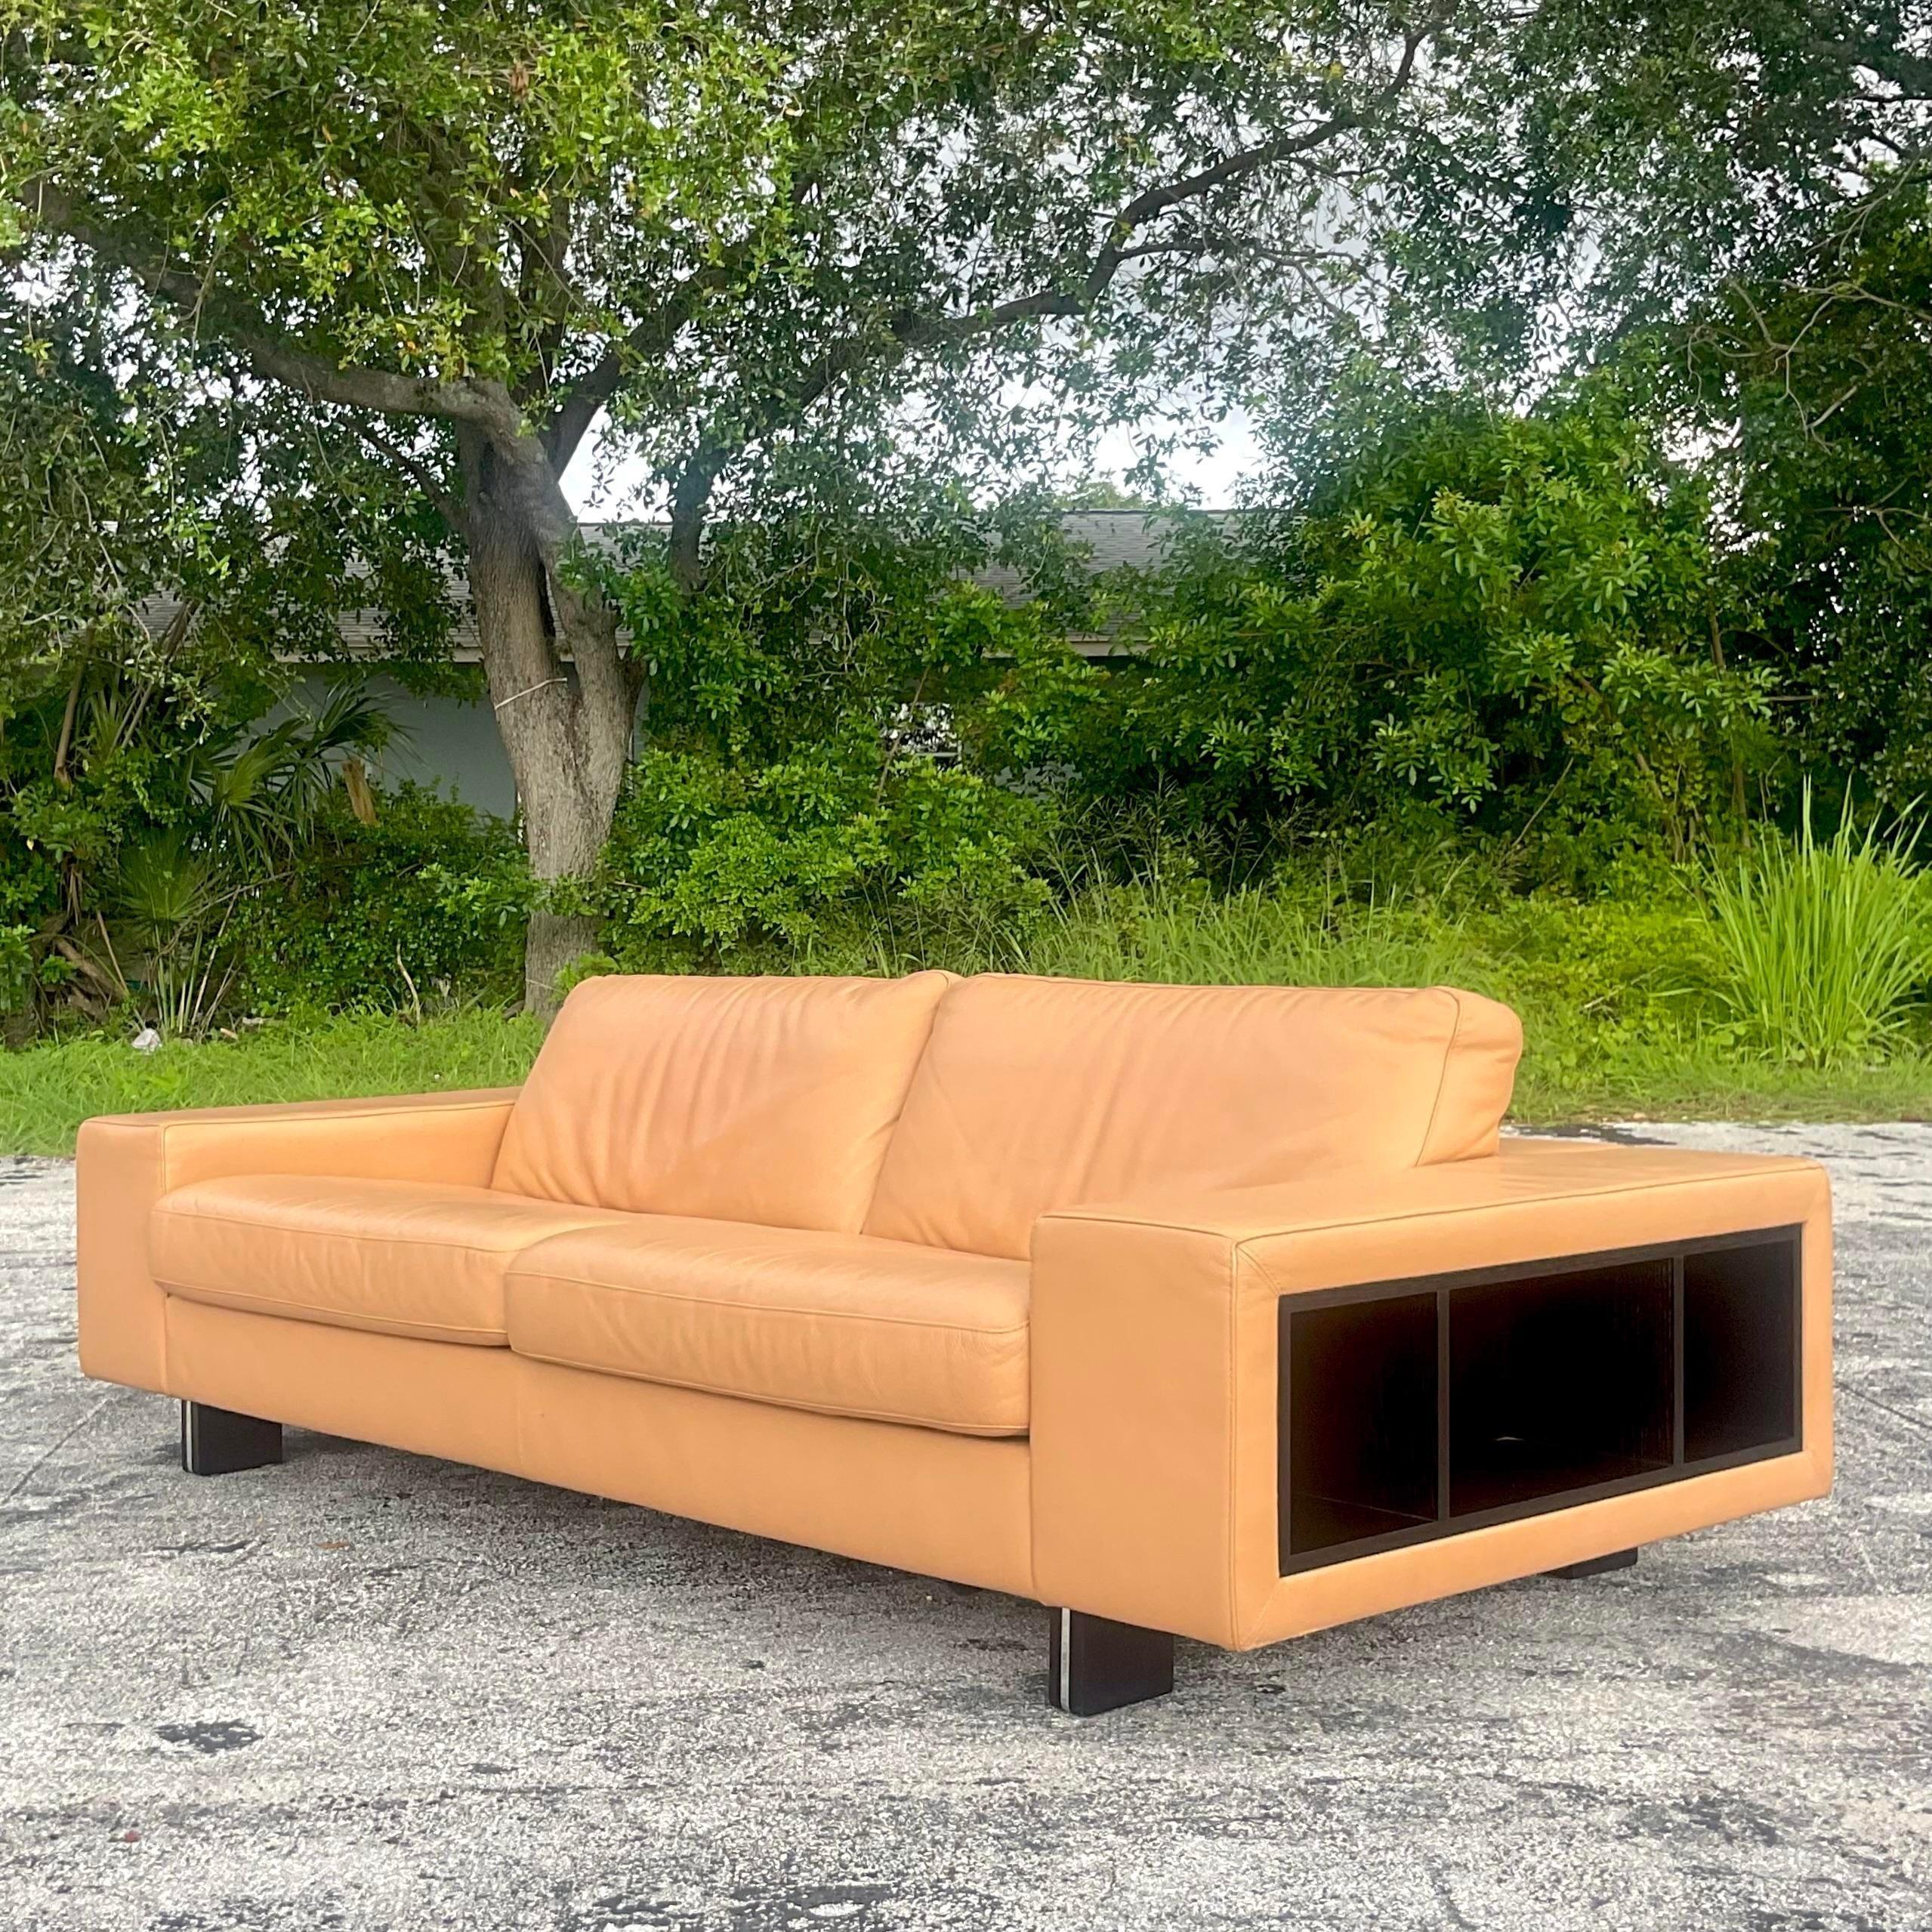 American Vintage Contemporary Tagged Roche Bobois Leather Shelf Sofa For Sale